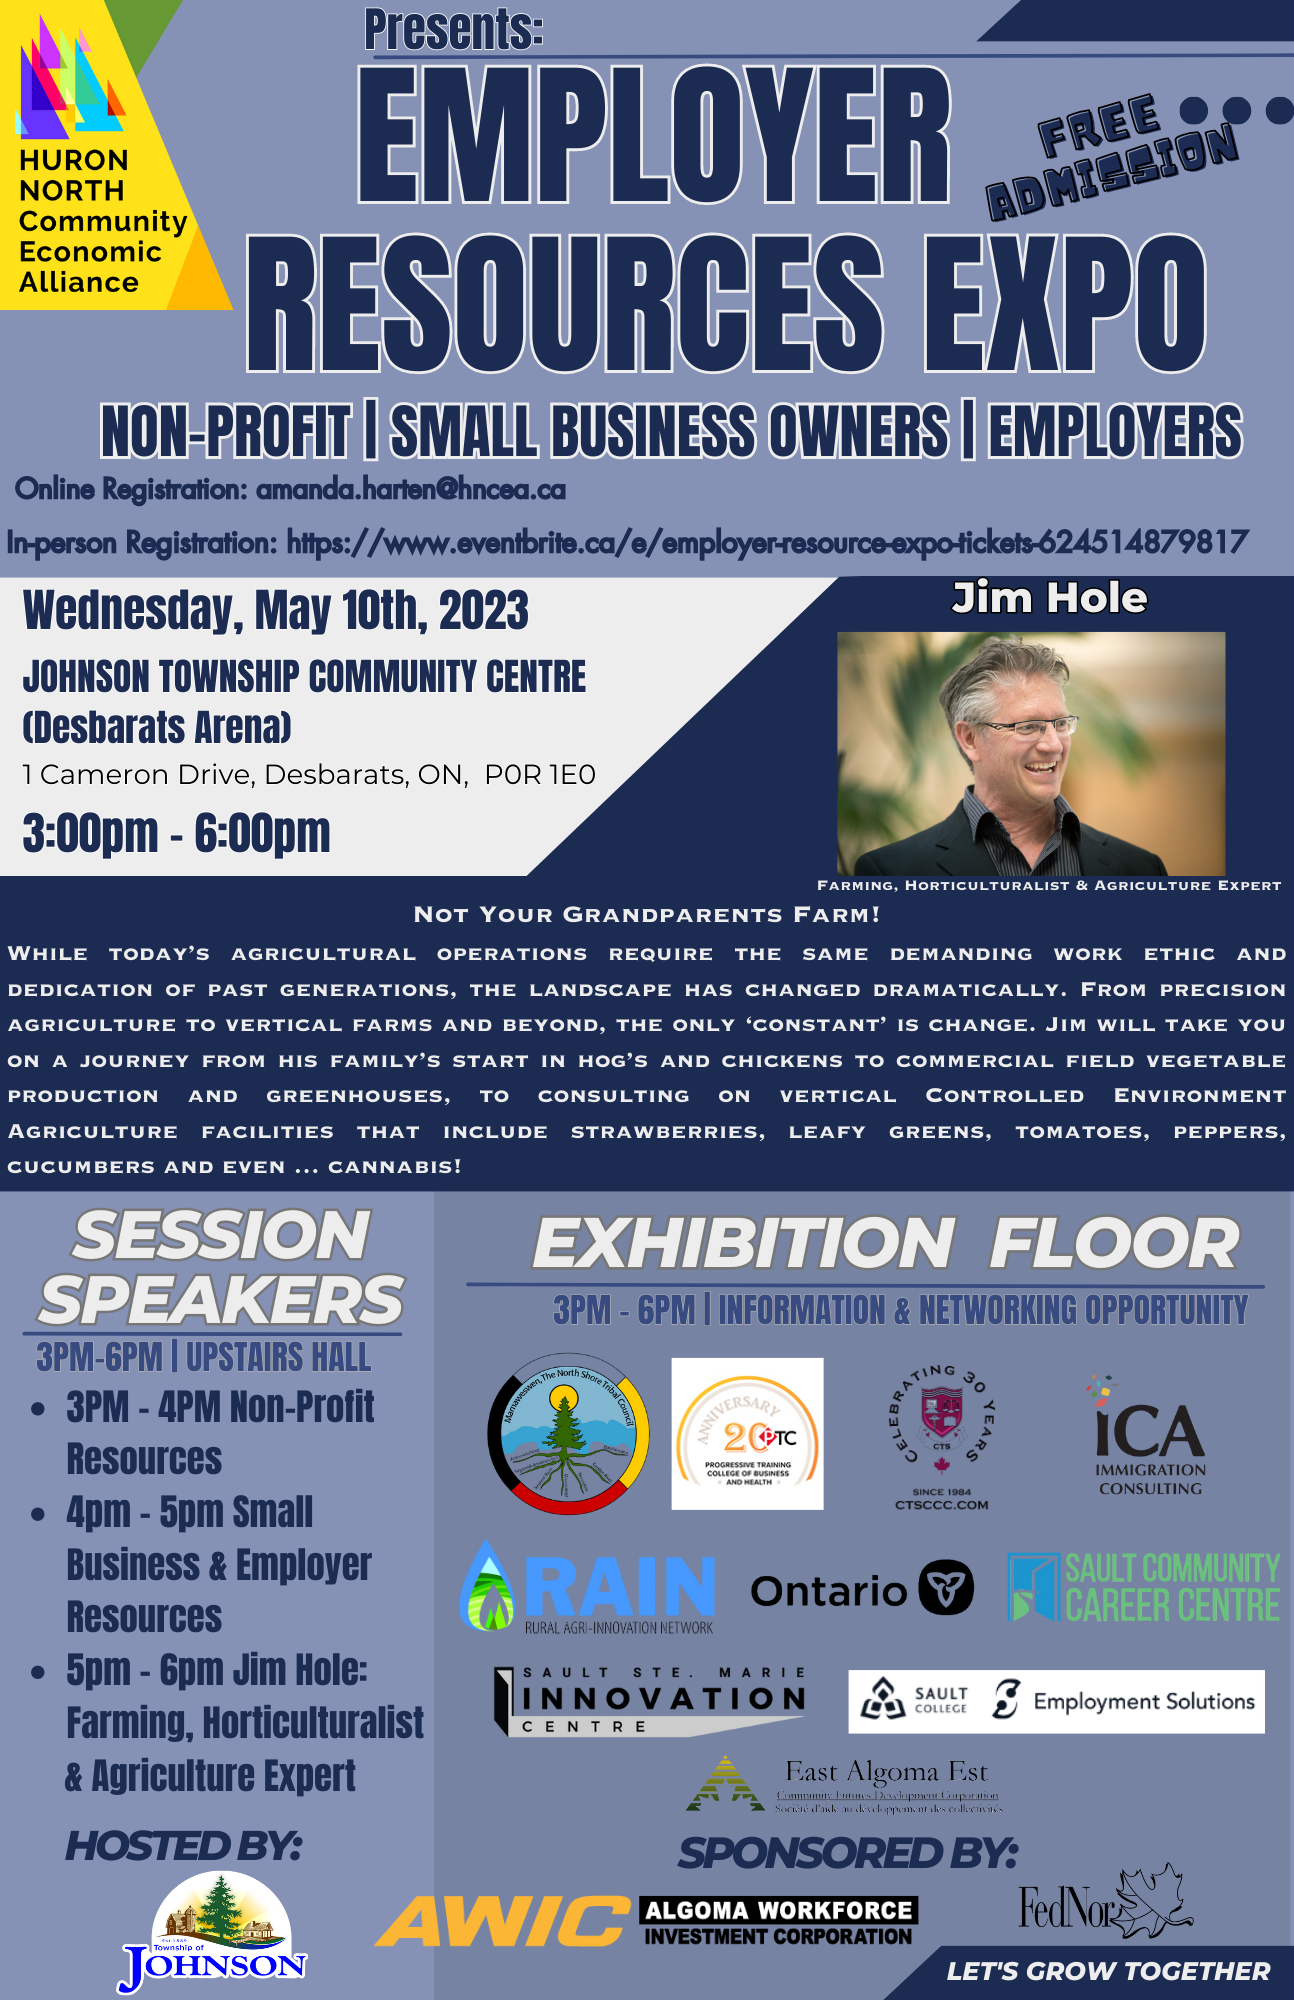 Employer Resources Expo, held Wednesday May 10, 2023 from 3 p.m. to 6 p.m., located at 1 Cameron Drive, Desbarats, ON. Online registration amanda.harten@hncea.ca.  